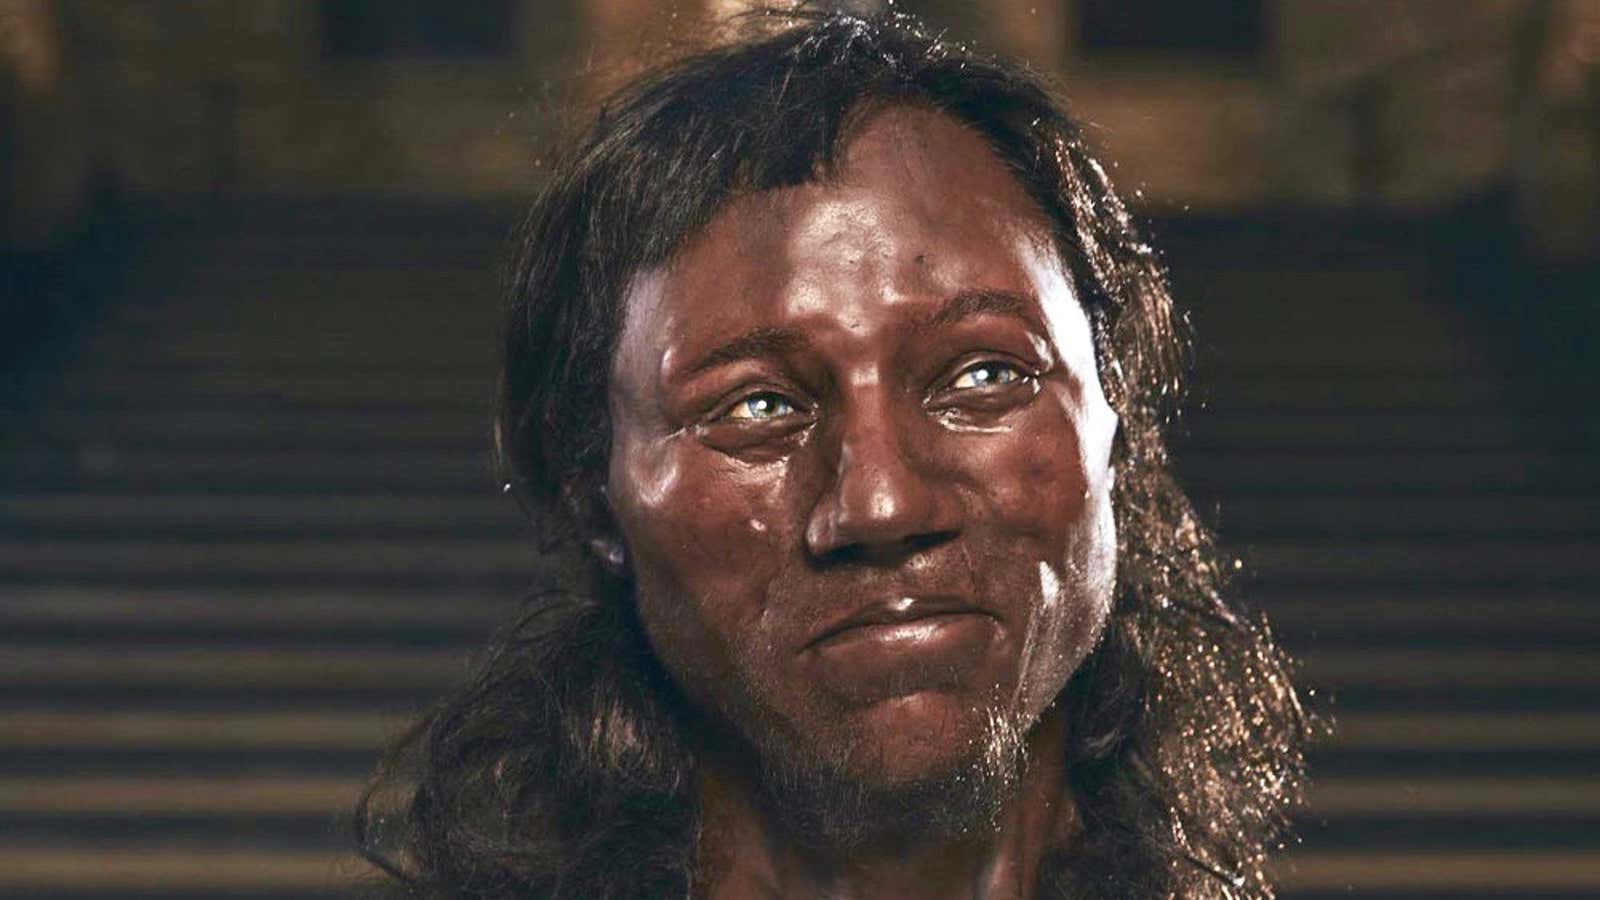 Genetic analysis reveals that the first Brit probably looked like this.